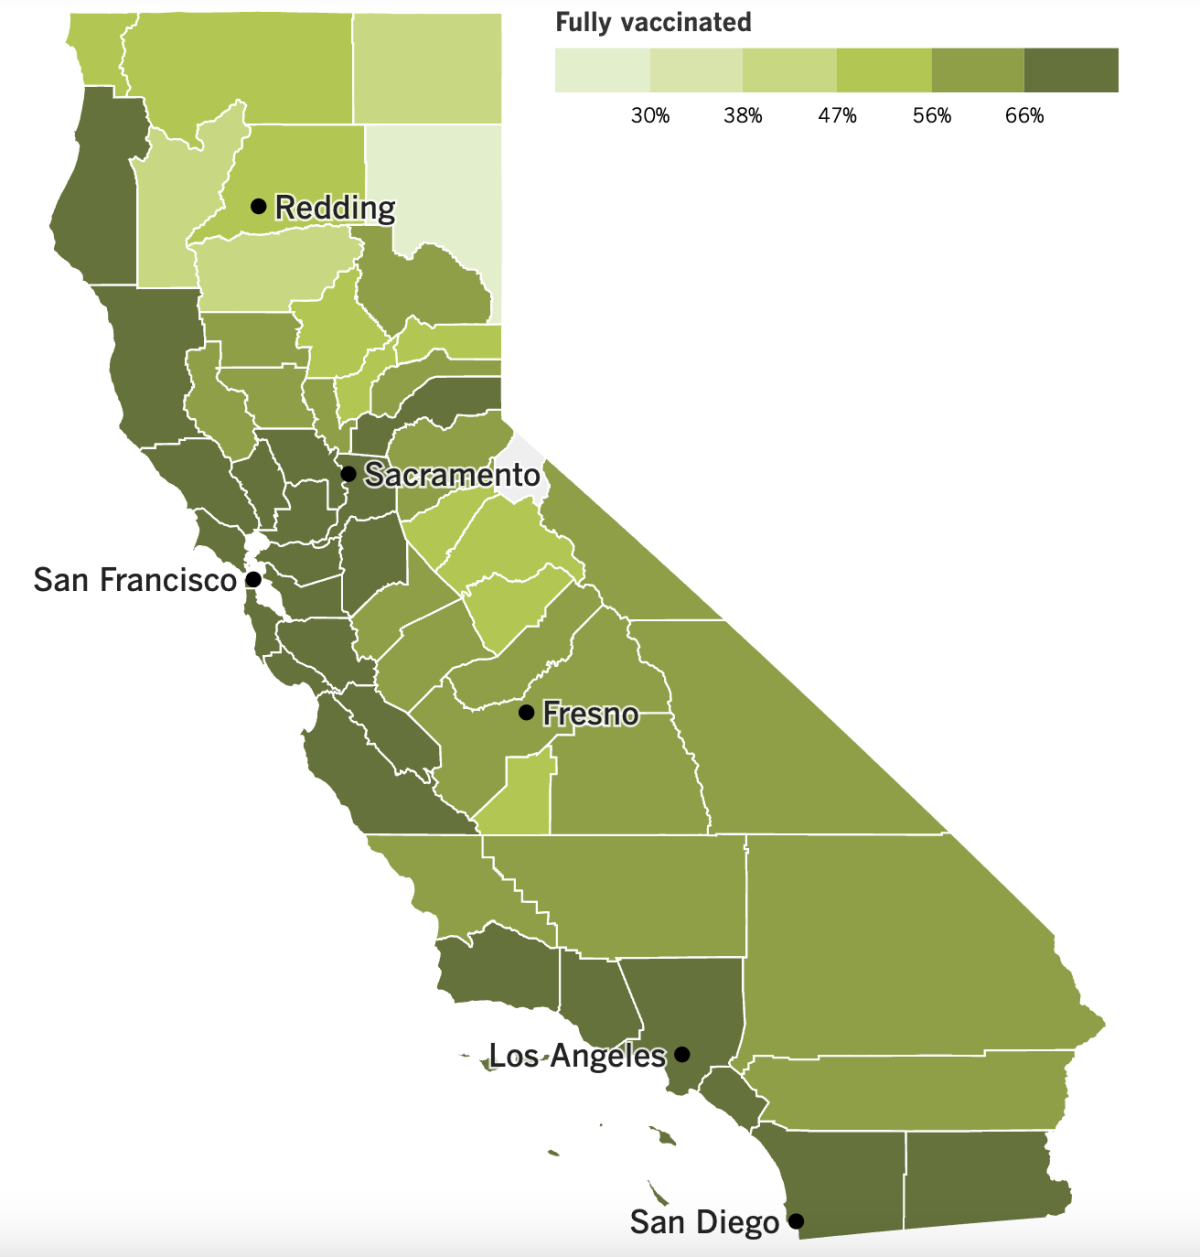 A map showing California's COVID-19 vaccination progress by county as of Feb. 28, 2023.